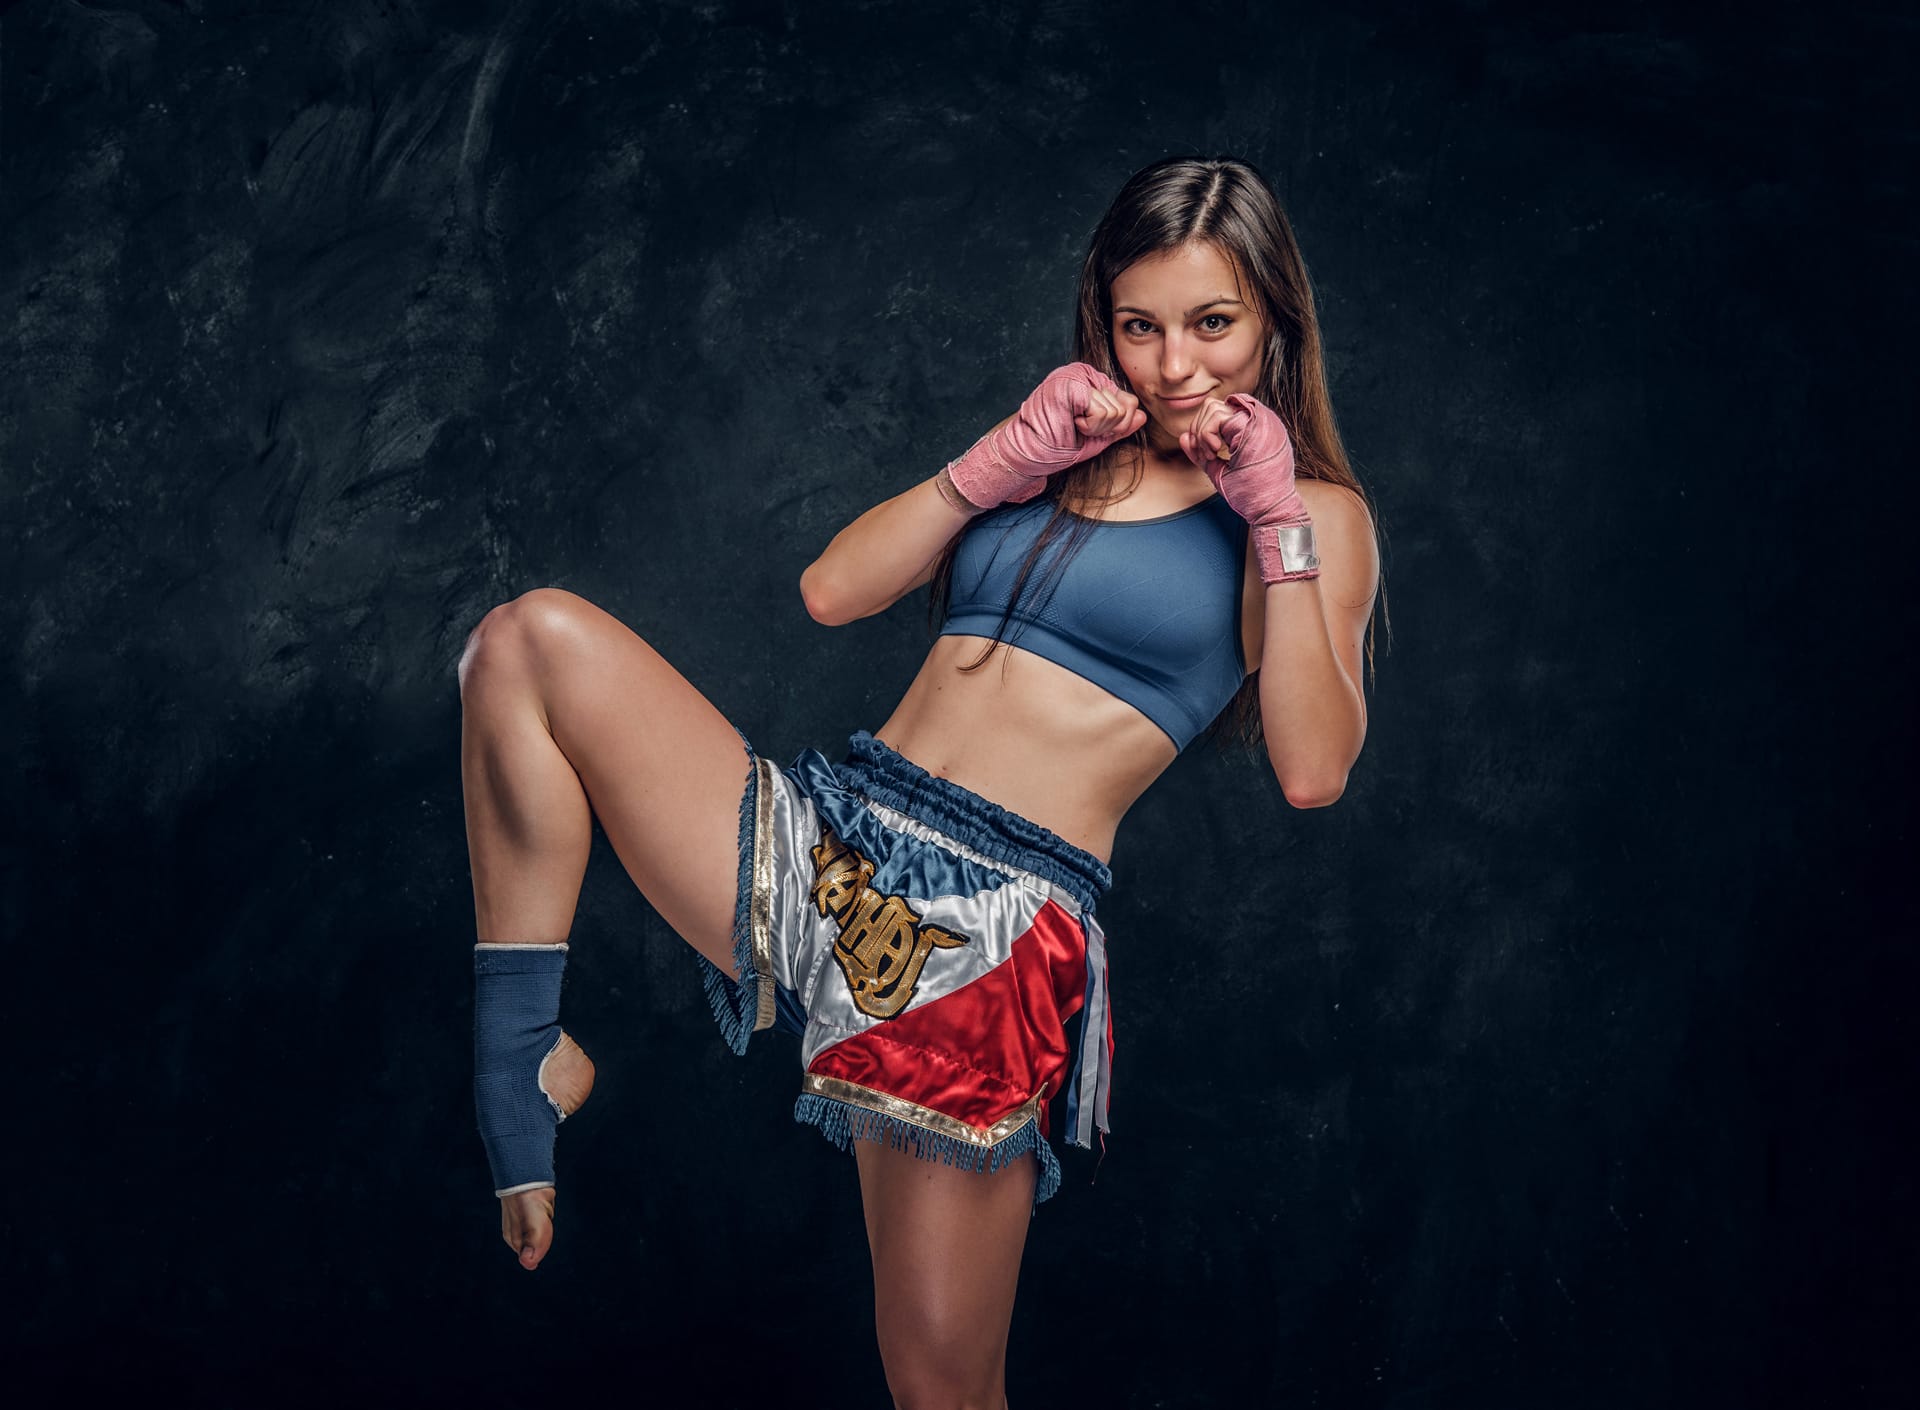 Woman is demonstrating her kick boxer pose while posing photographer